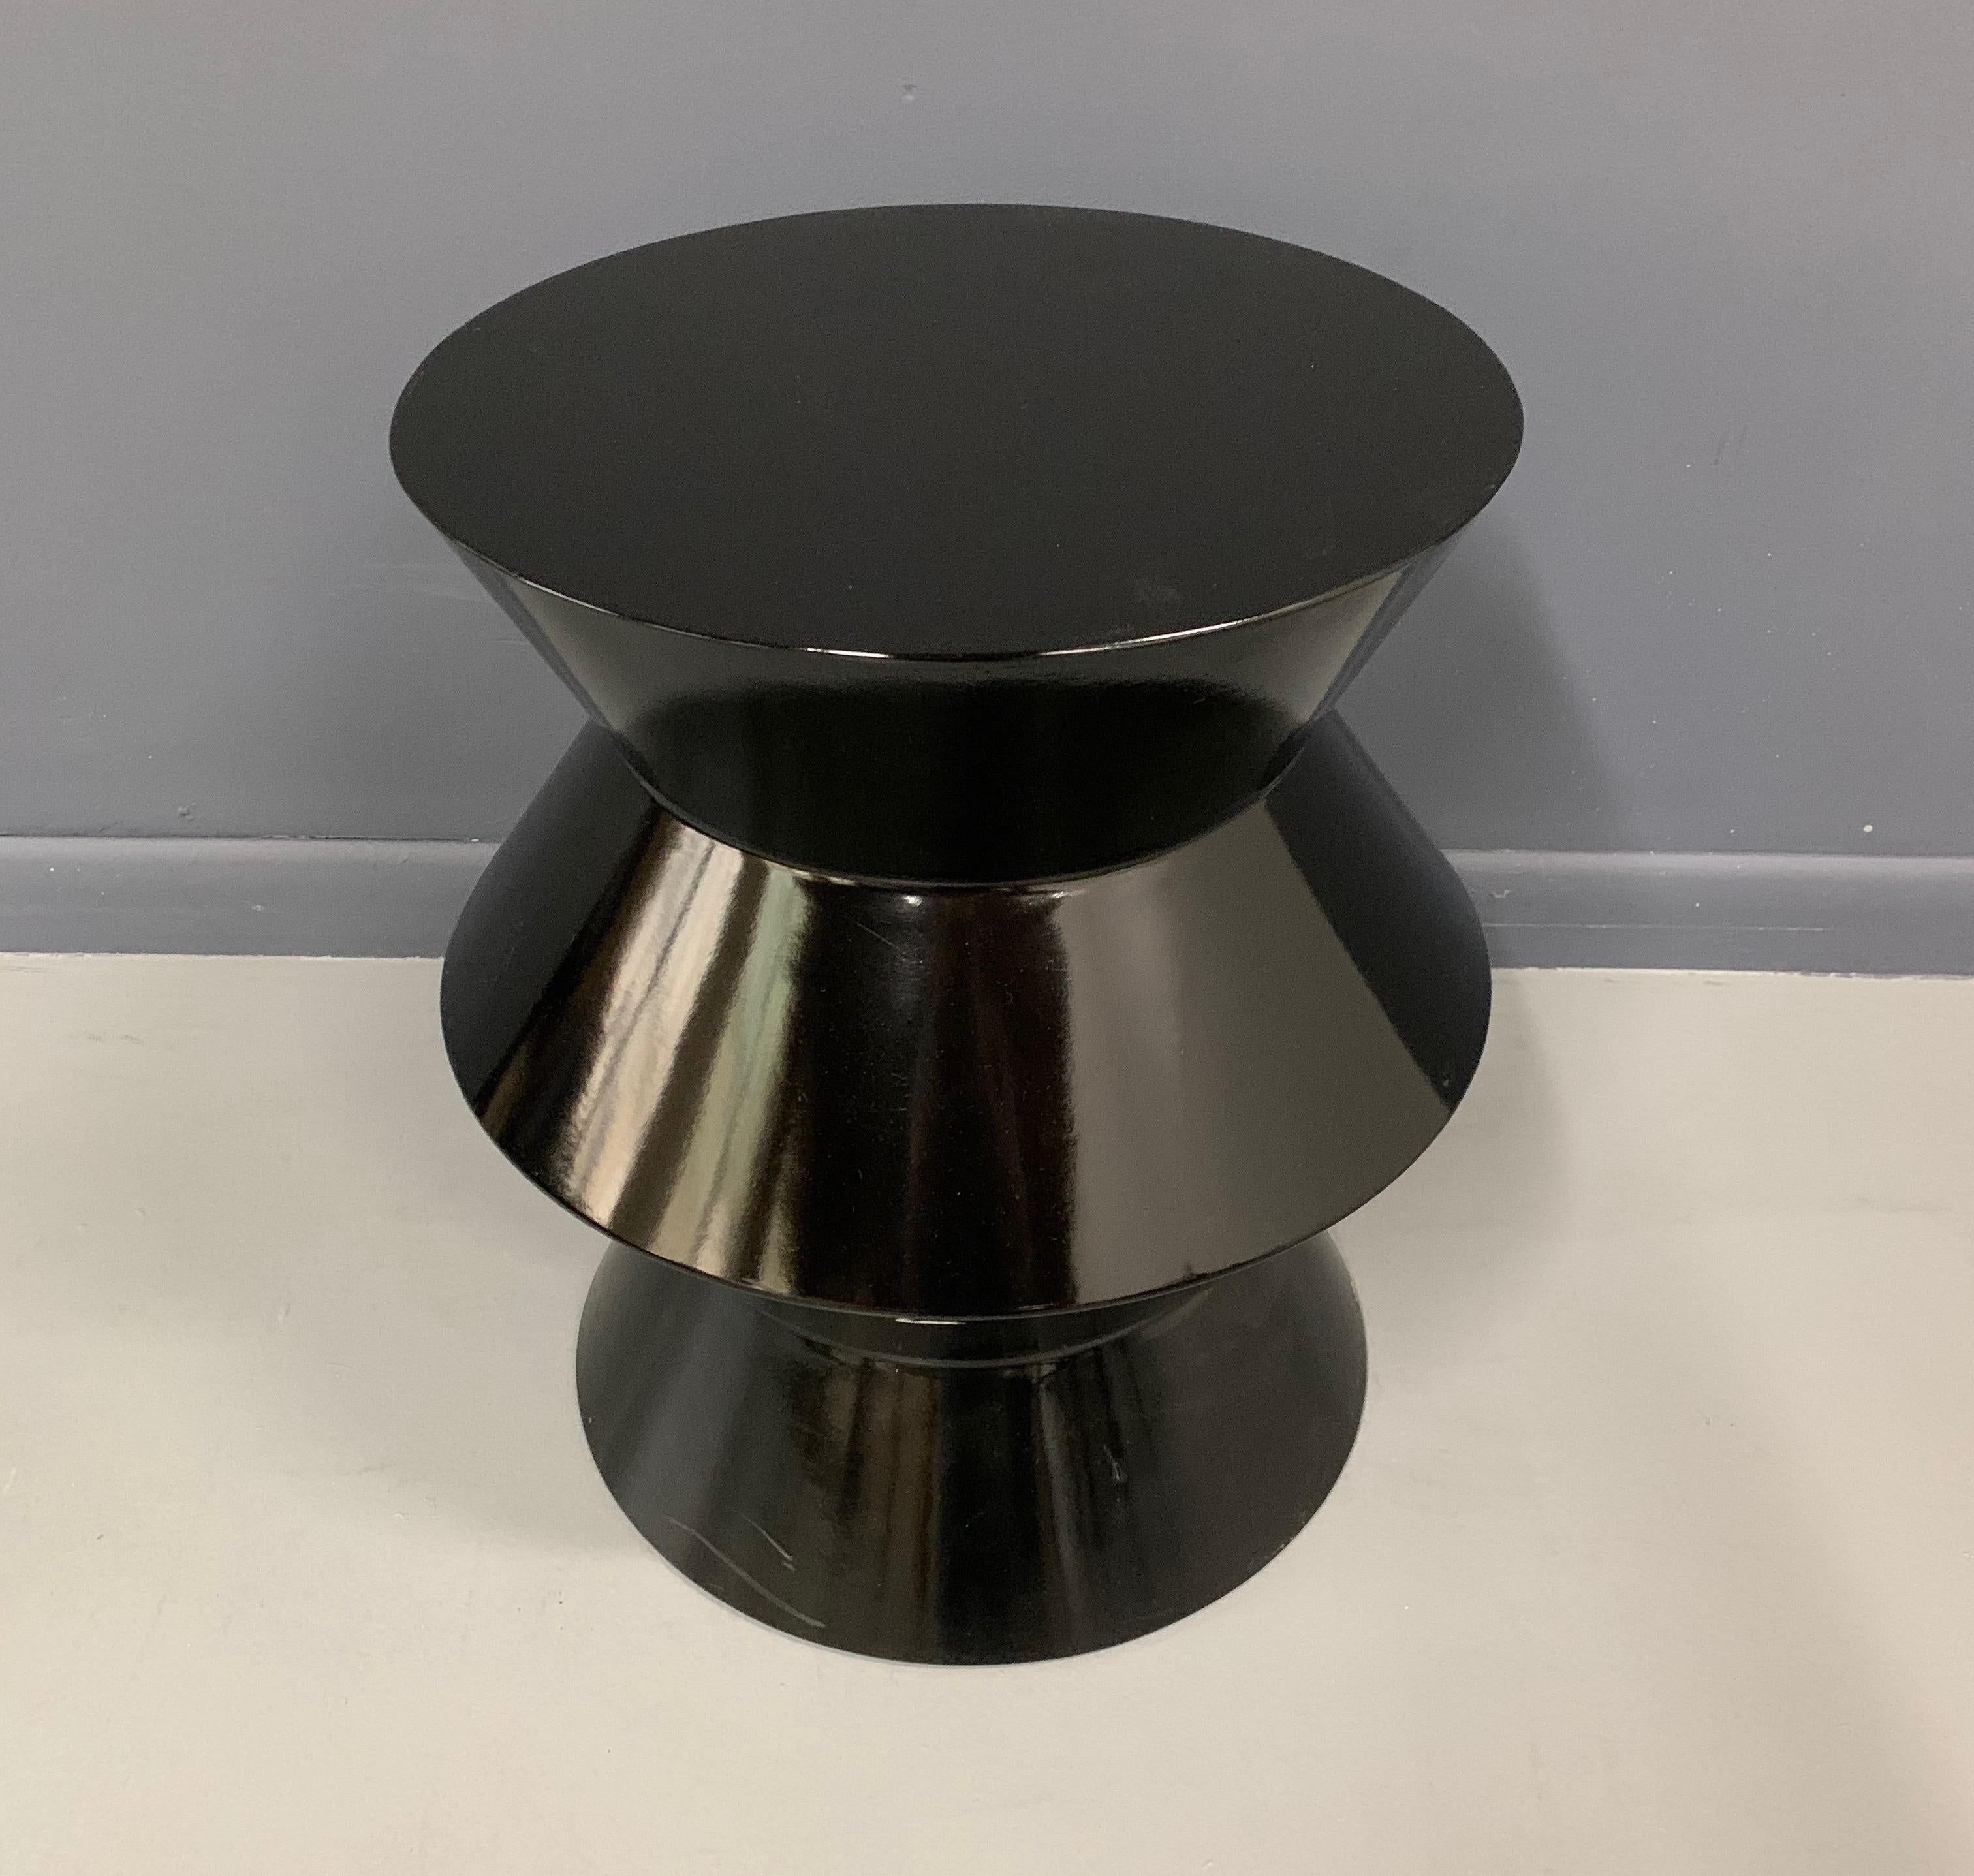 European Postmodern Side Table in the Style of Sottsass